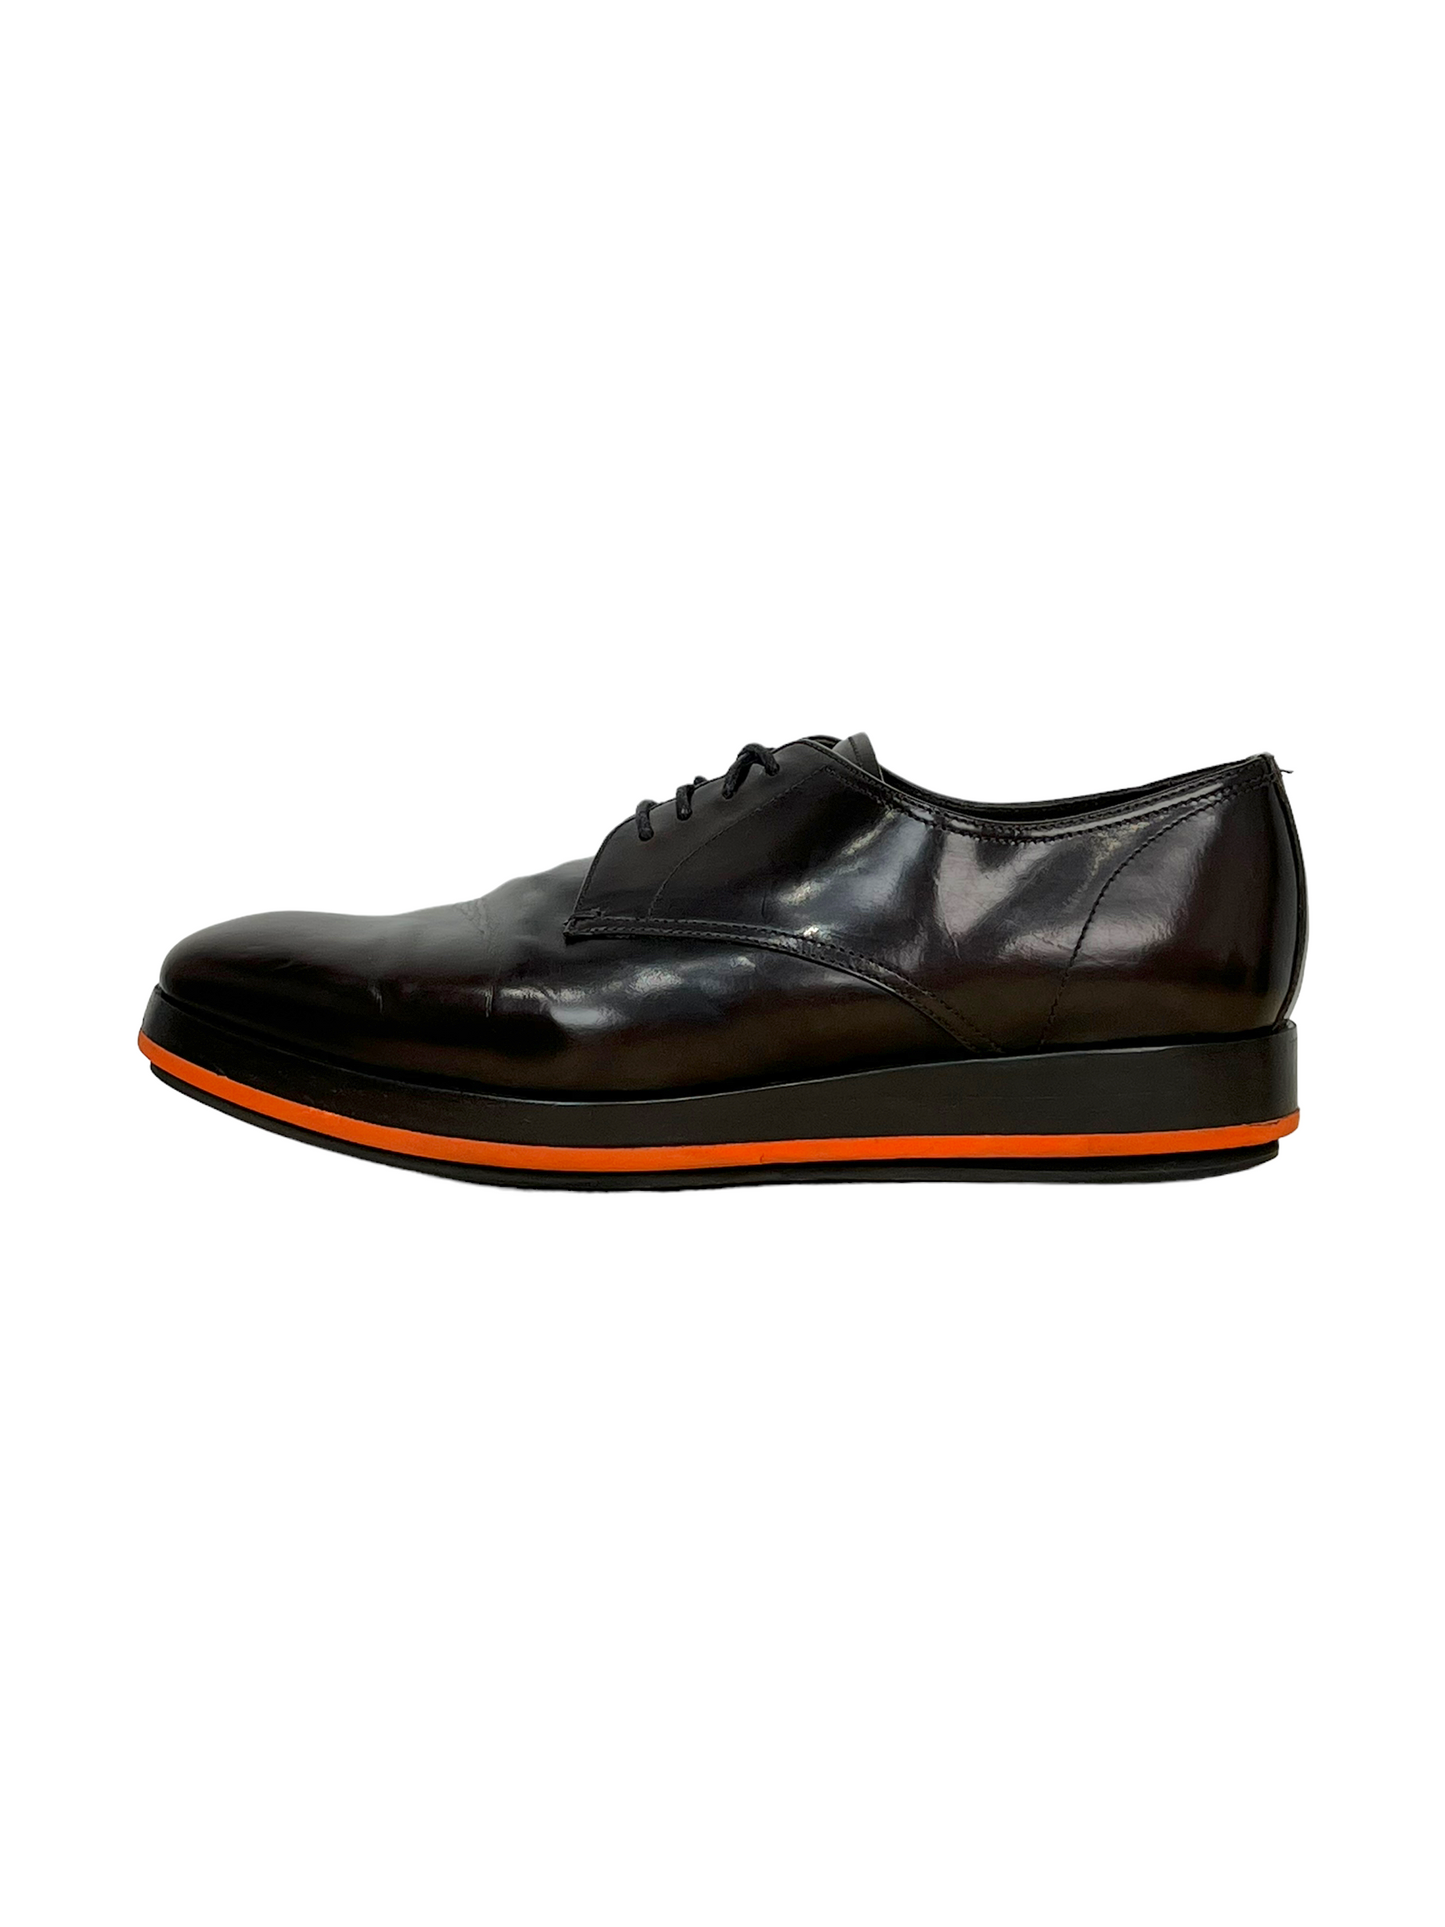 Prada Dark Brown Derby Dress Shoe - Genuine Design Luxury Consignment for Men. New & Pre-Owned Clothing, Shoes, & Accessories. Calgary, Canada